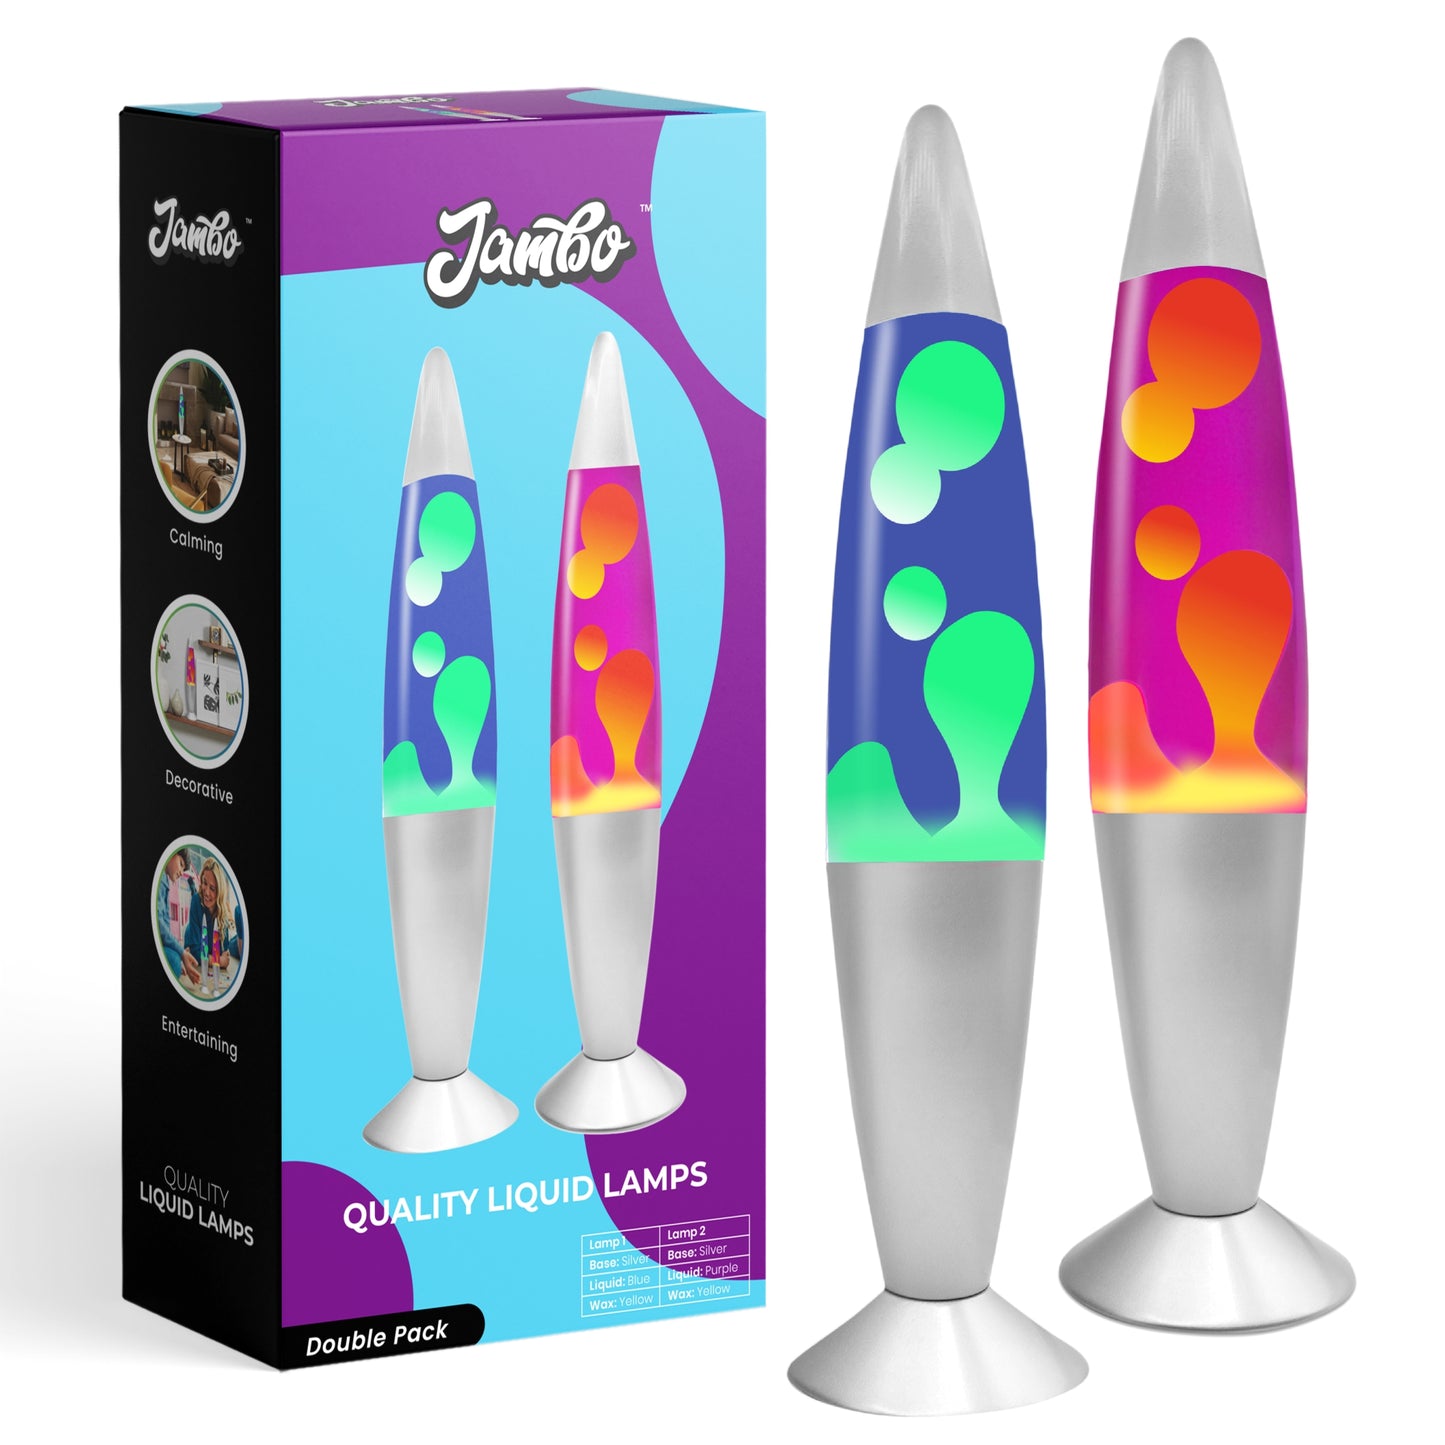 Jambo 16-Inch Beautiful Liquid Motion Lamp |Entertaining for Adults and Kids (Silver Base, Blue Liquid, Yellow Wax, and Silver Base, Purple Liquid, Yellow Wax, 16", Double Pack)